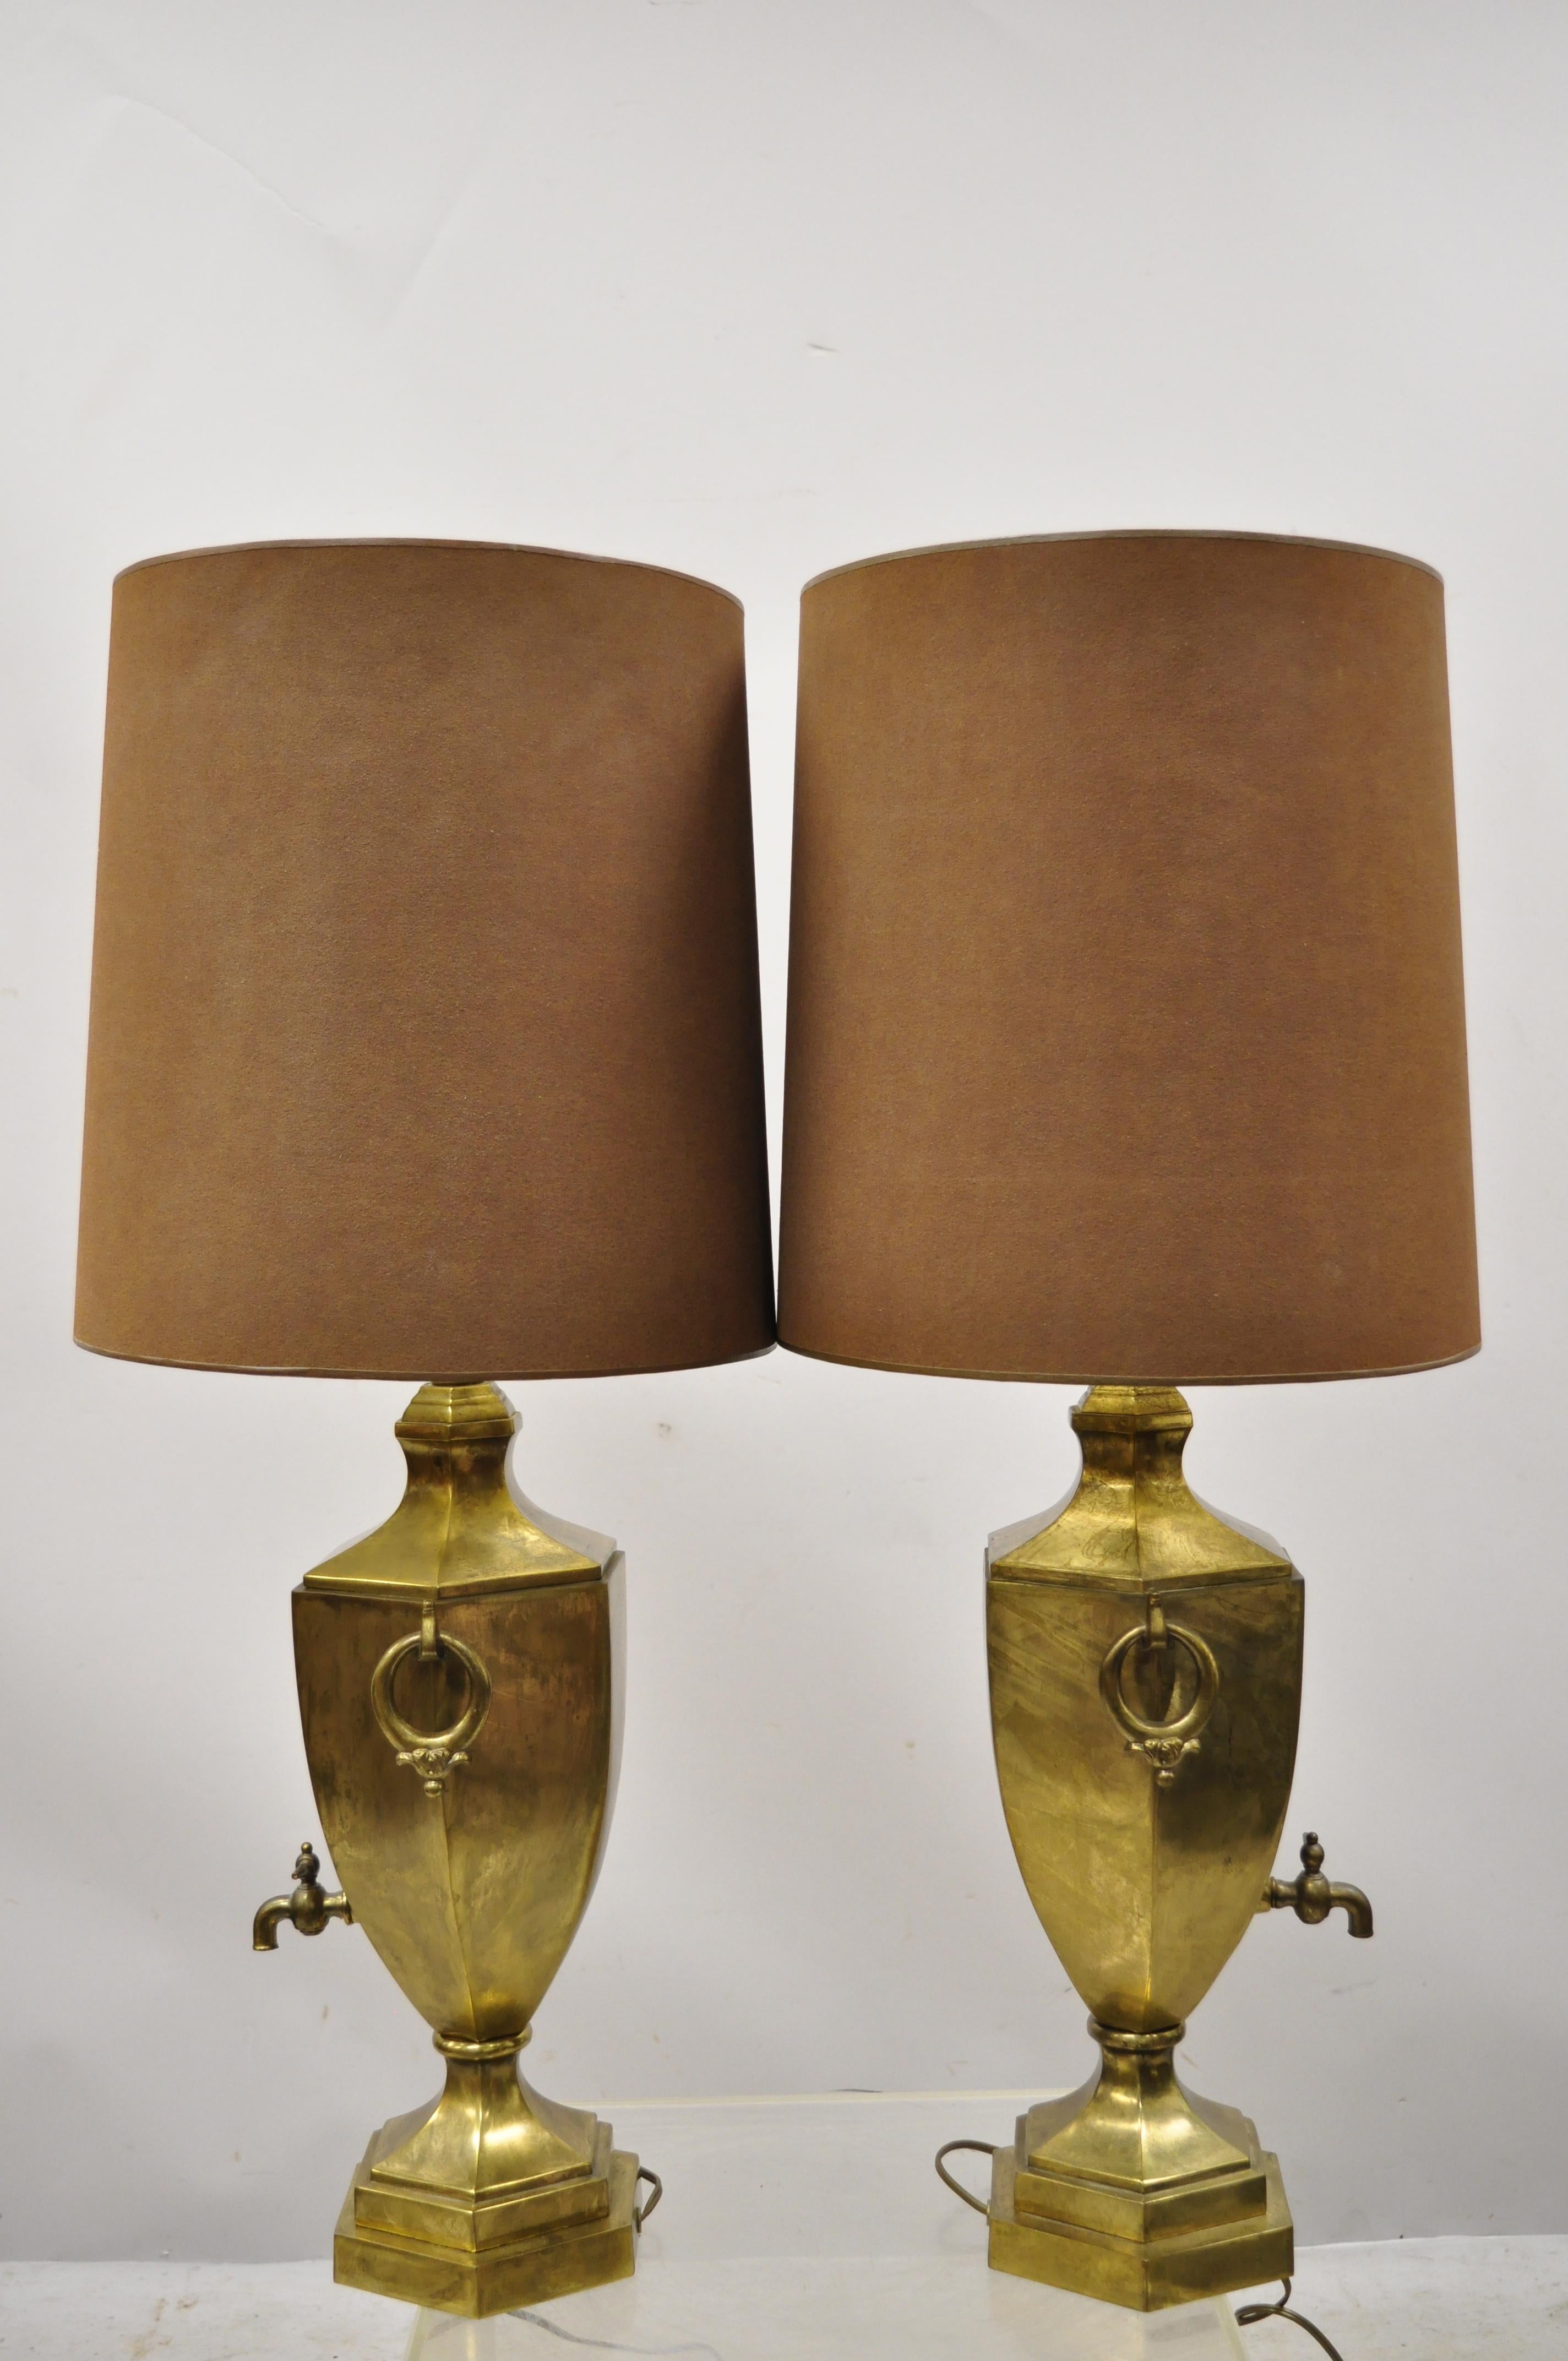 20th Century Paul Hanson Burnished Brass Samovar Urn Form Table Lamps with Shades - a Pair For Sale